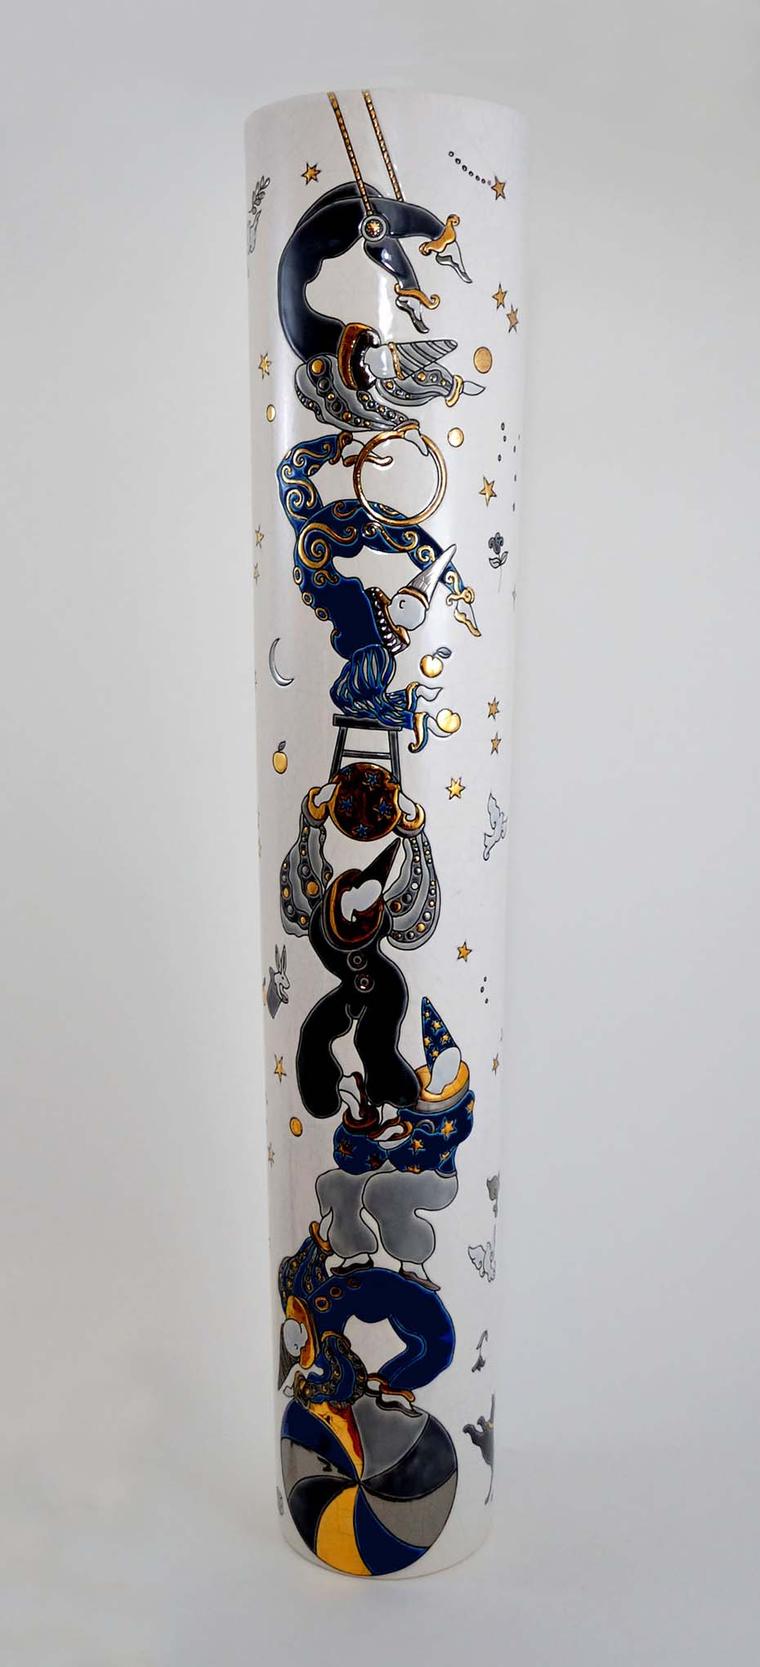 Jean Boggio Acrobates earthenware and enamel vases with platinum and gold come in a limited edition of 100, all signed and numbered.